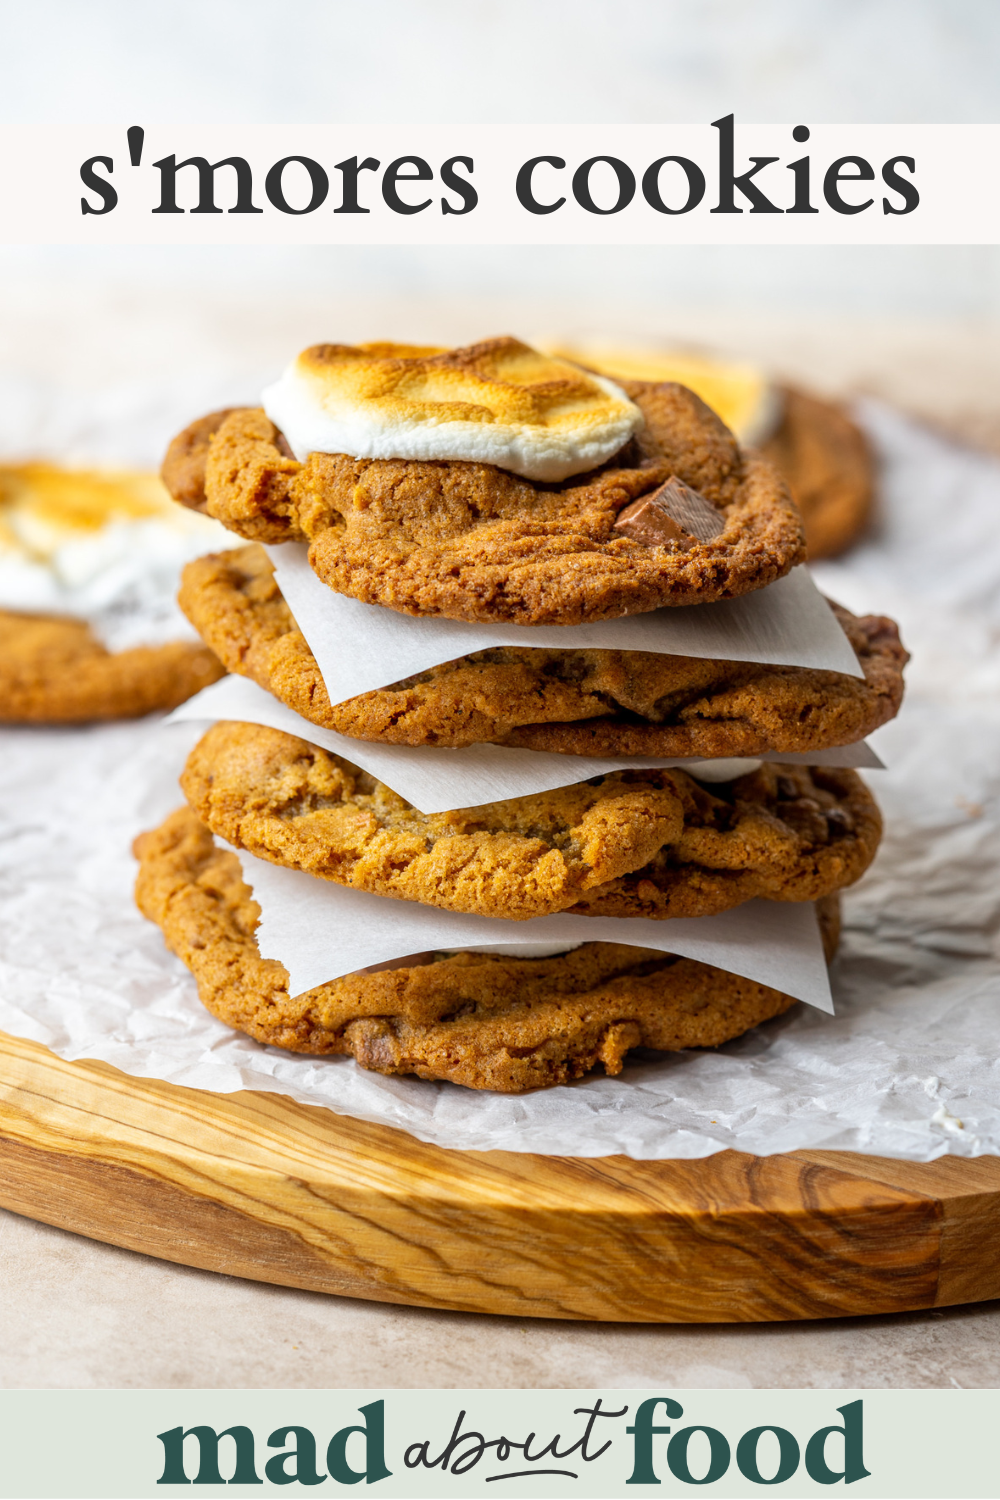 Image for pinning S'more Cookies recipe on Pinterest